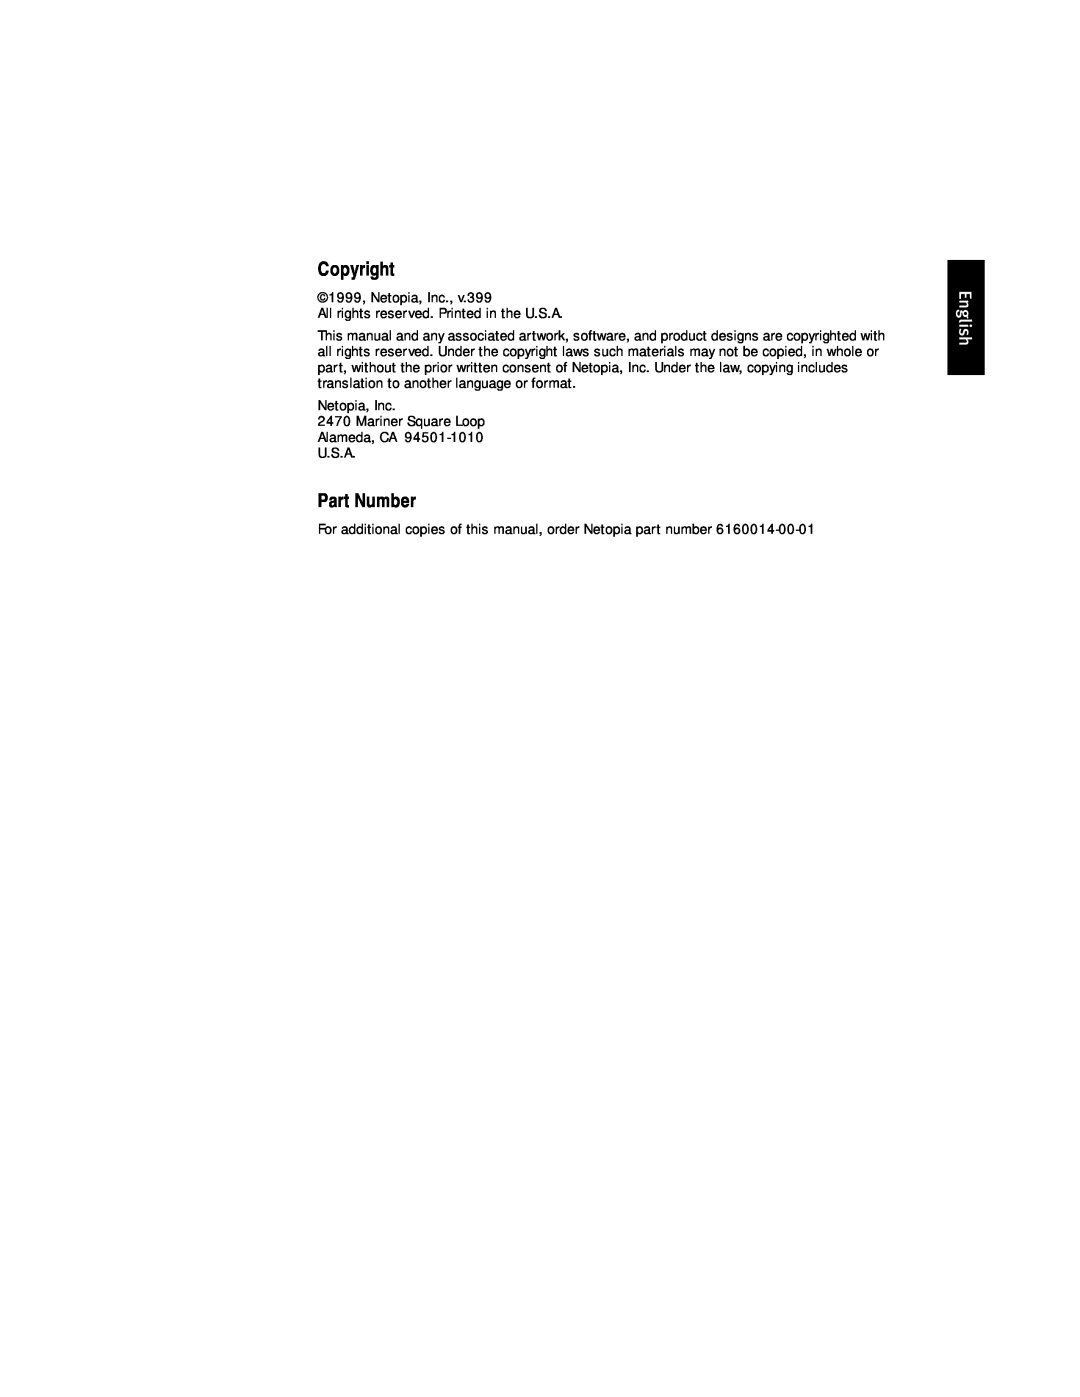 Netopia R-Series manual Copyright, Part Number, English 